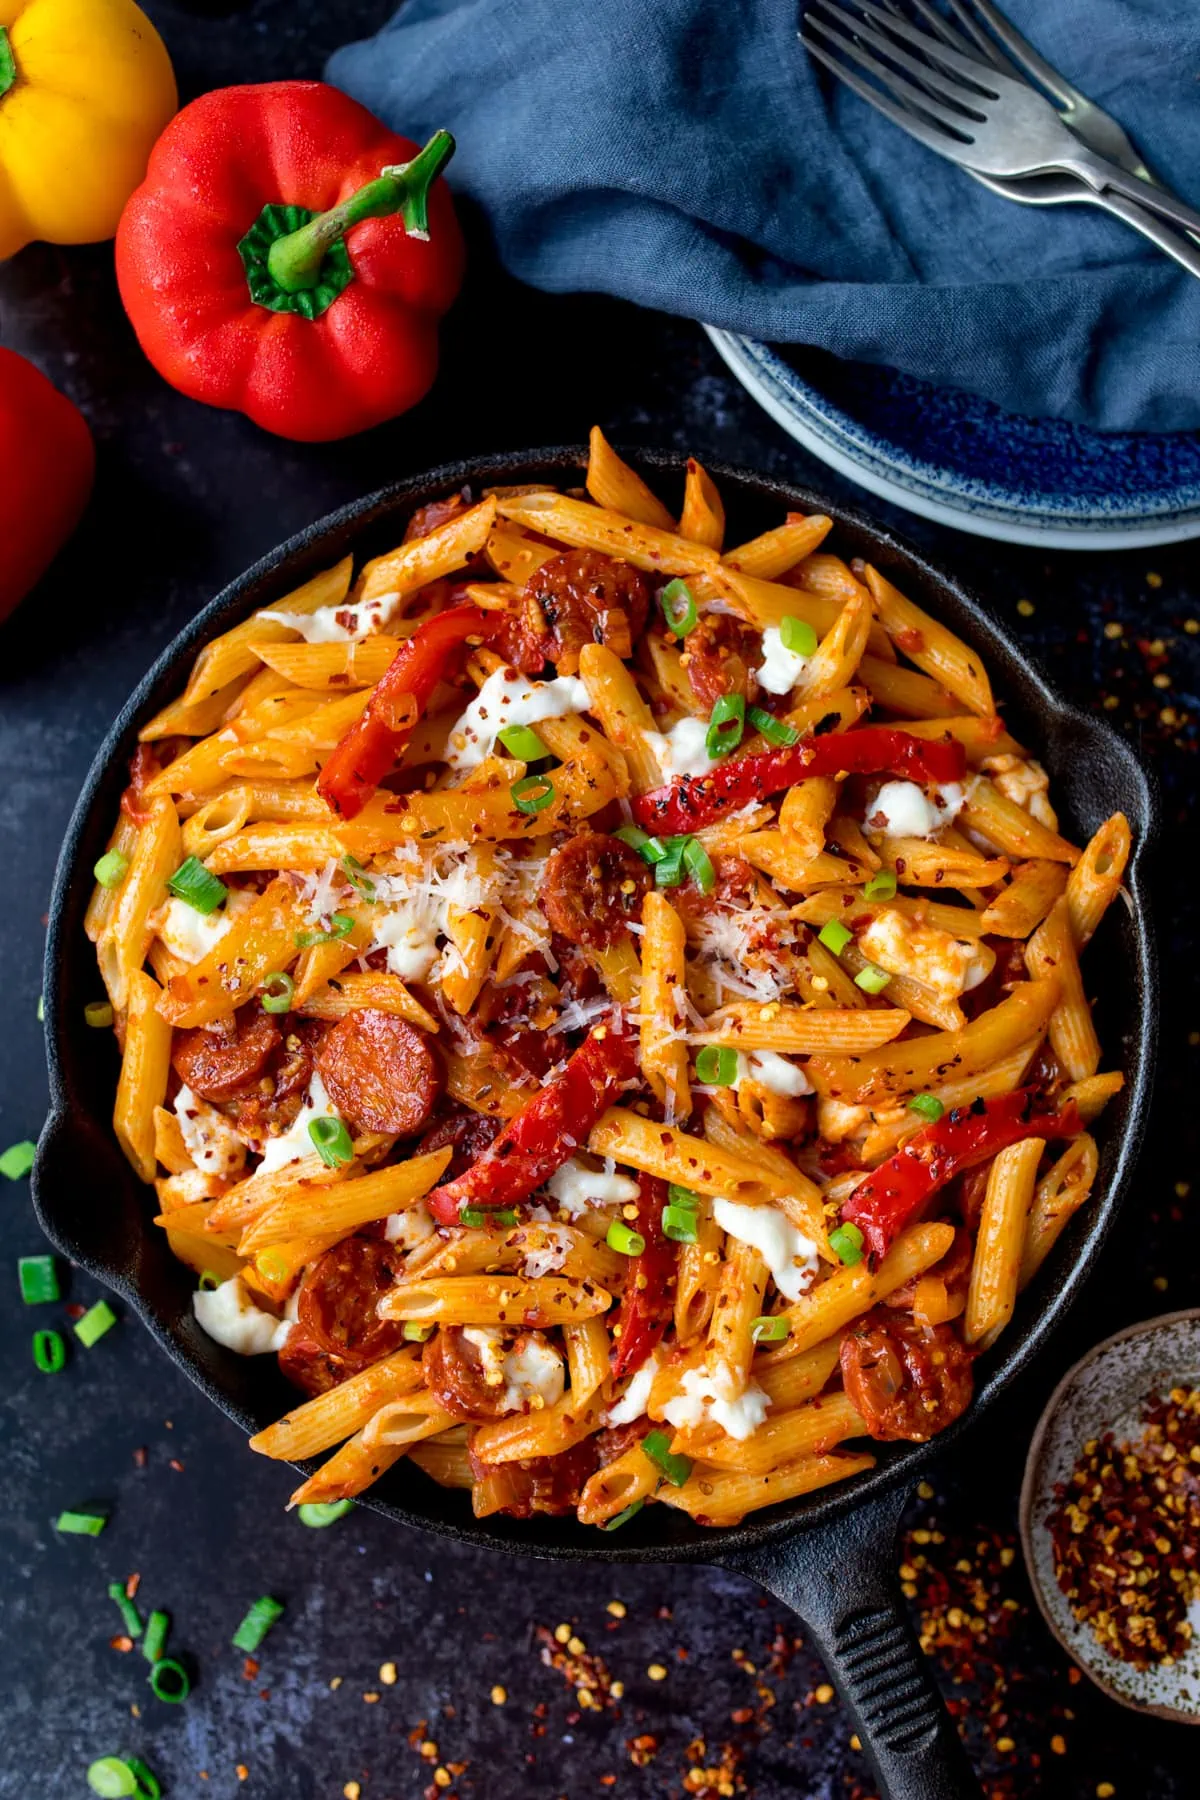 Overhead image of penne arrabbiata in a pan with mozzarella and chorizo. The pan is on a dark background and there are ingredients, plates, forks and a blue napkin scattered around.